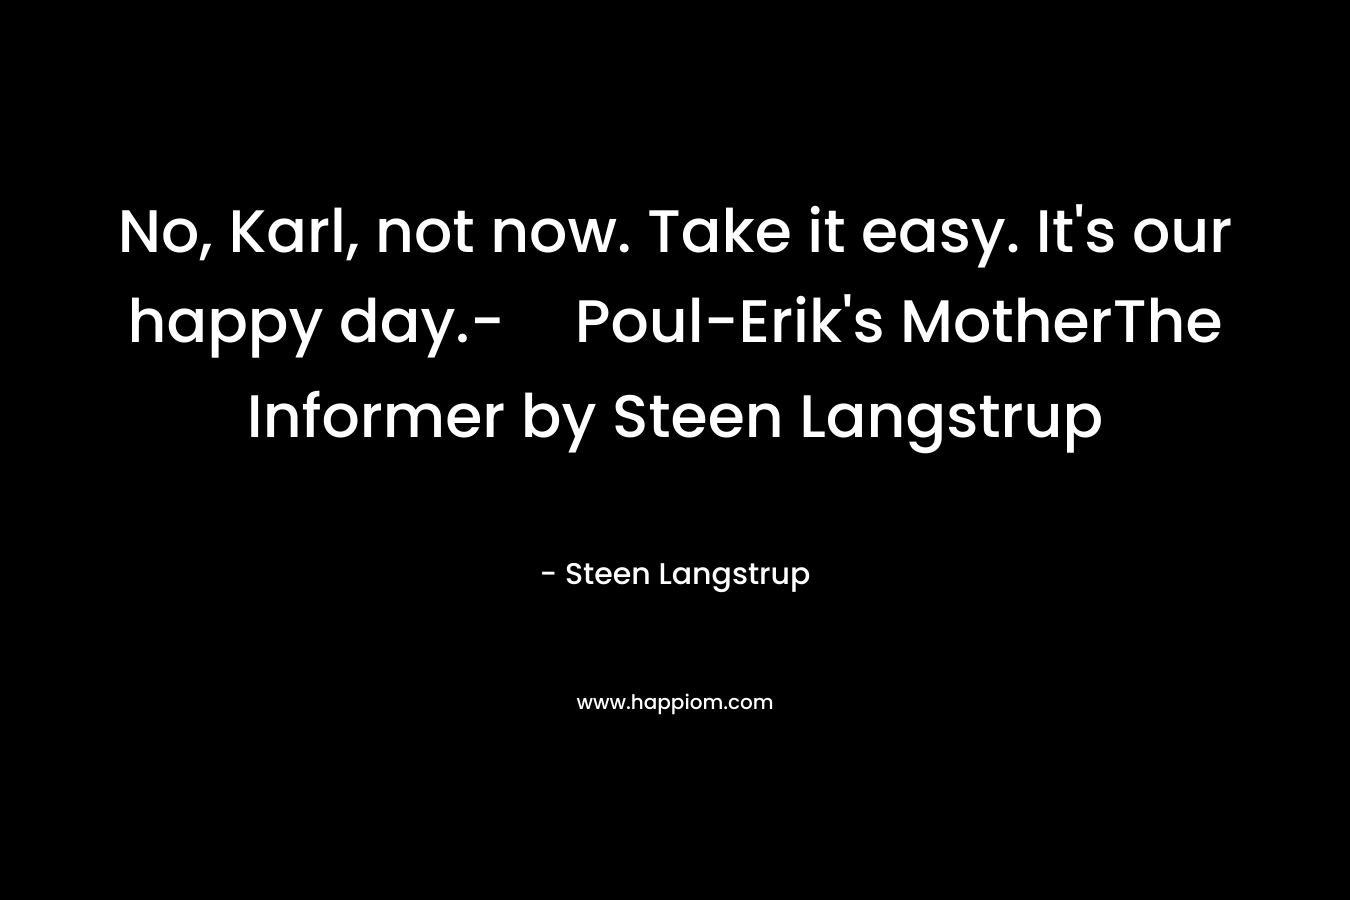 No, Karl, not now. Take it easy. It's our happy day.-Poul-Erik's MotherThe Informer by Steen Langstrup